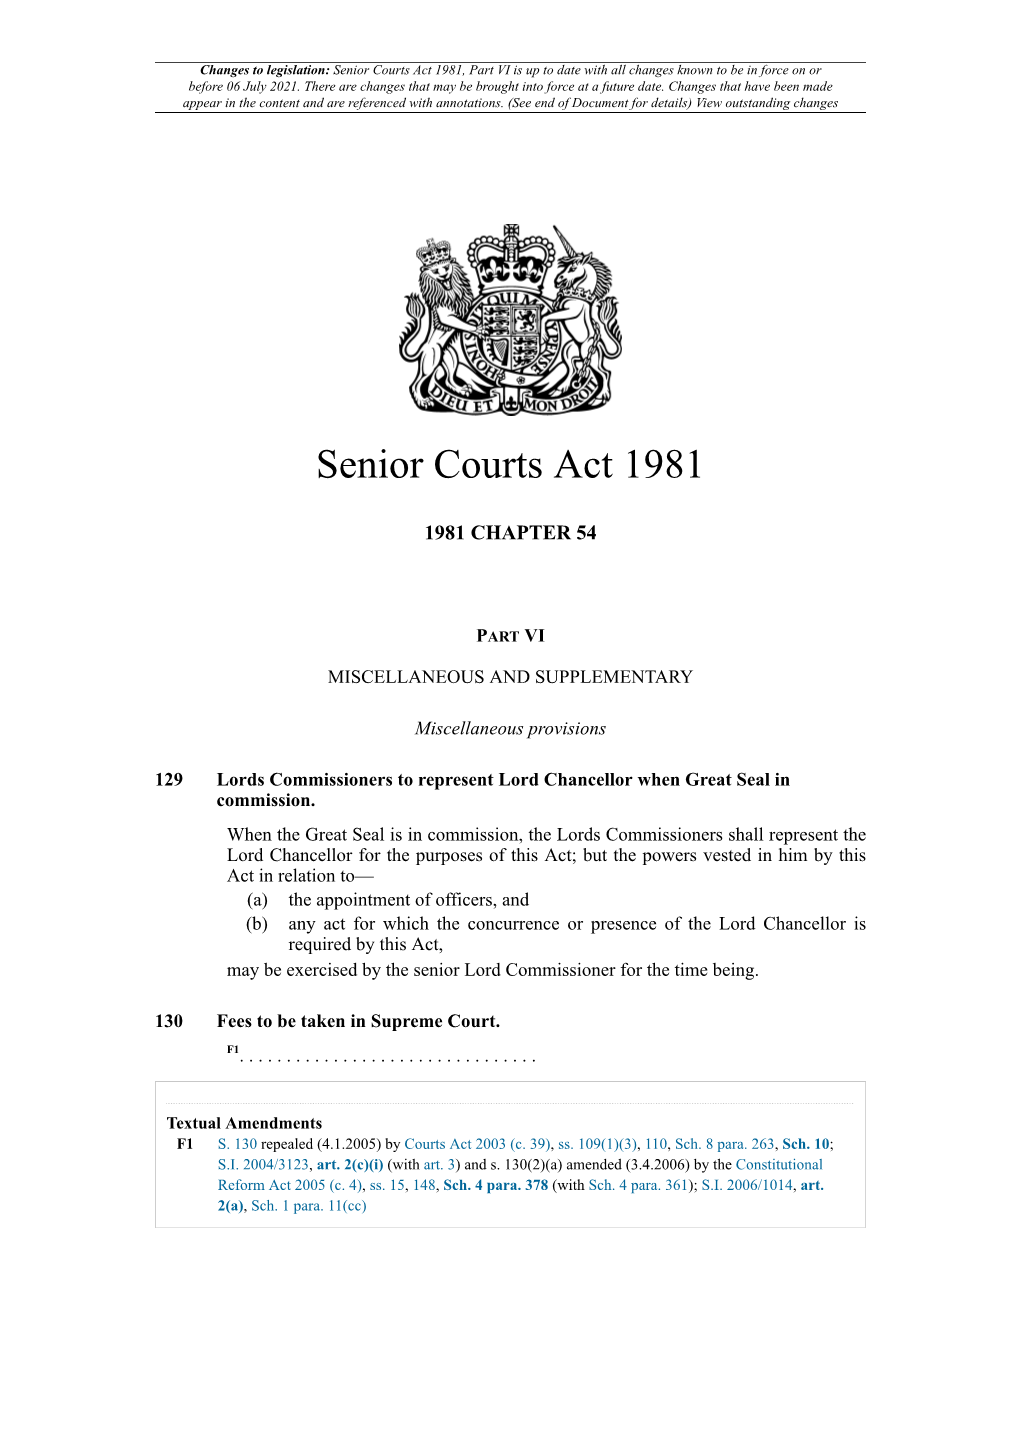 Senior Courts Act 1981, Part VI Is up to Date with All Changes Known to Be in Force on Or Before 06 July 2021